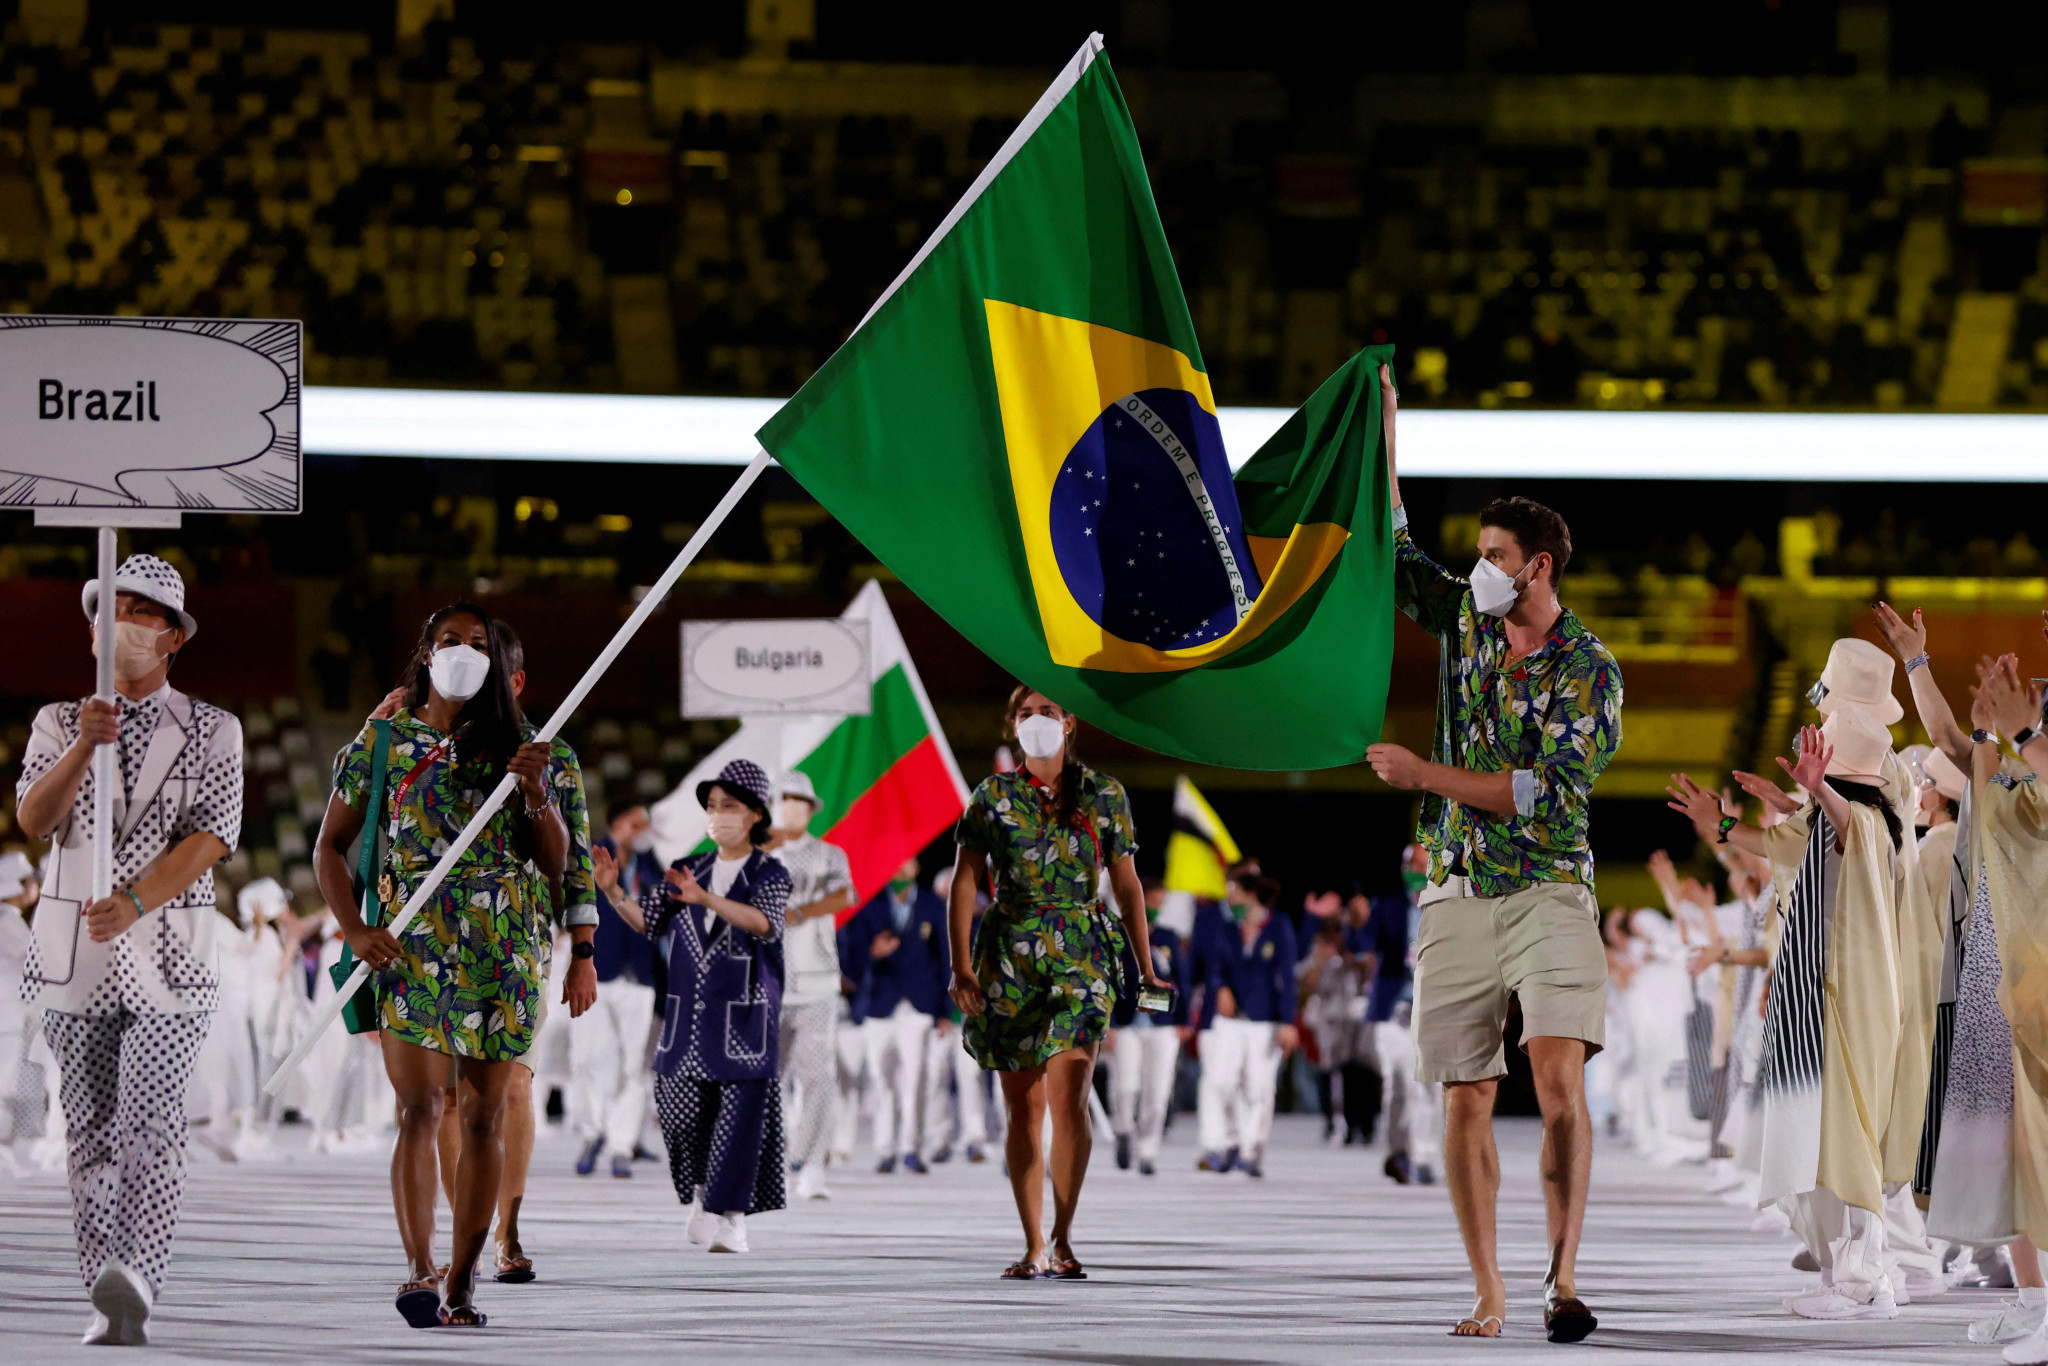 Brazil enjoyed its best performance to date at an Olympic Games at Tokyo 2020 ©Getty Images